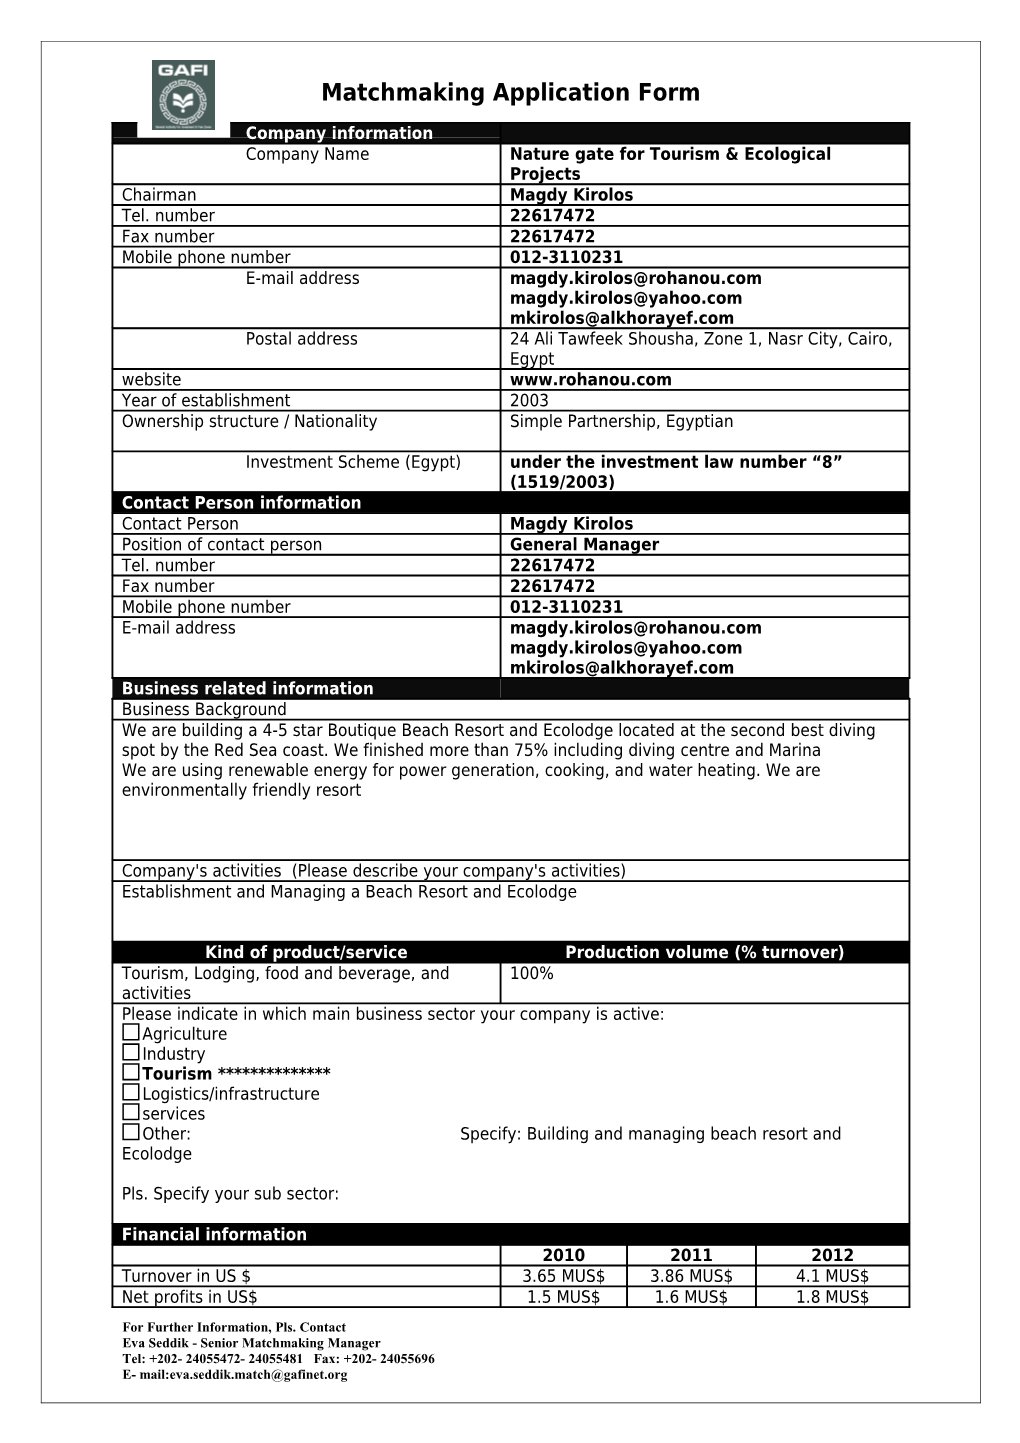 Matchmaking Application Form